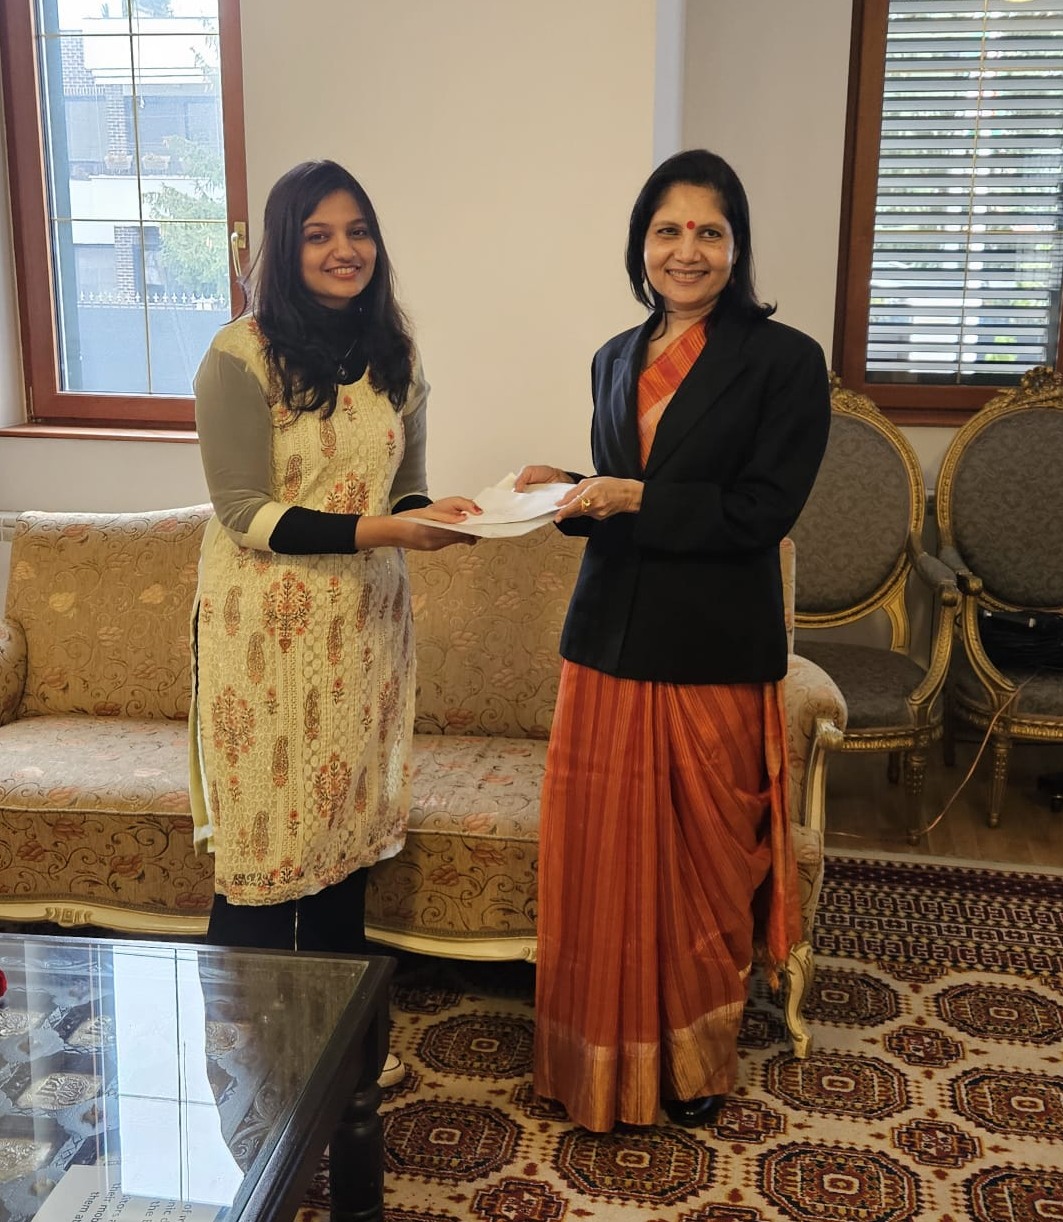 Ms. Shubhdarshini Tripathi, Ambassador of India distributed prizes and certificates to the winners of Hindi Essay and Hindi Poem competition on the occasion of World Hindi Day 2024 - 18 January 2024